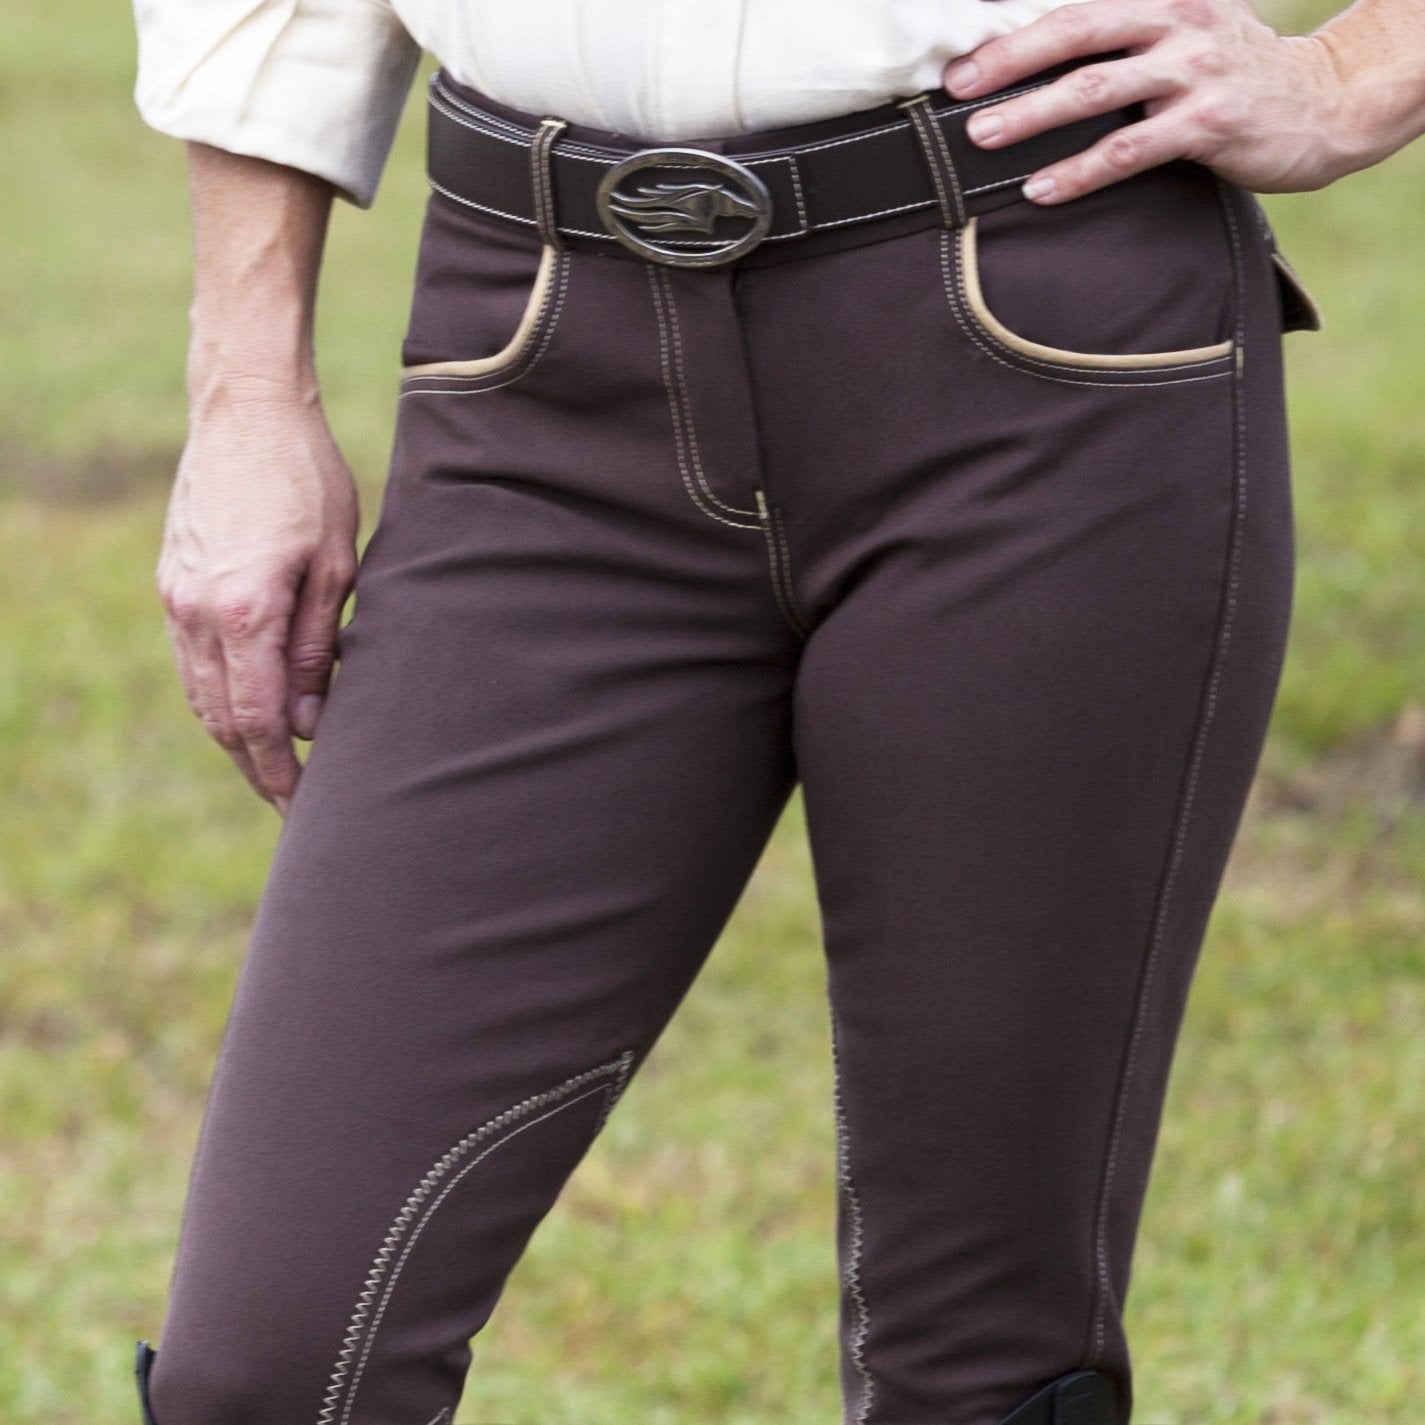 Huntley Equestrian Brown Riding Pant With Tan Welt Pockets